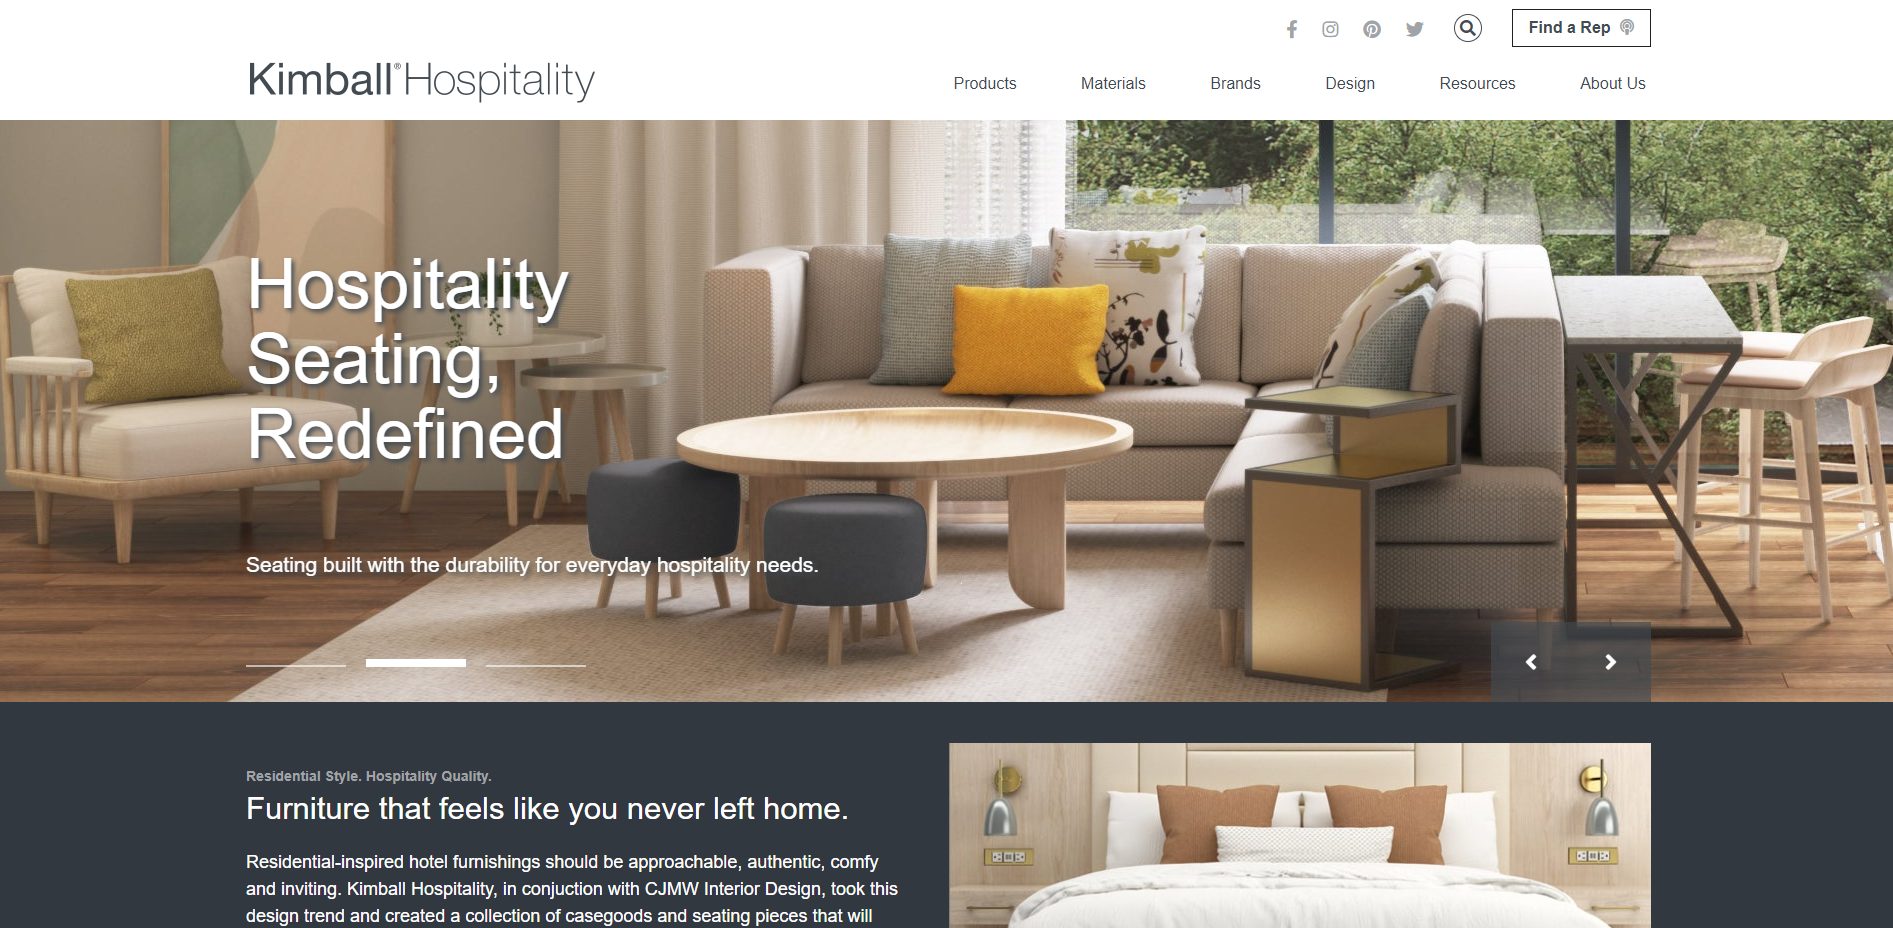 70% increase in visitors to Kimball Hospitality's modern website 